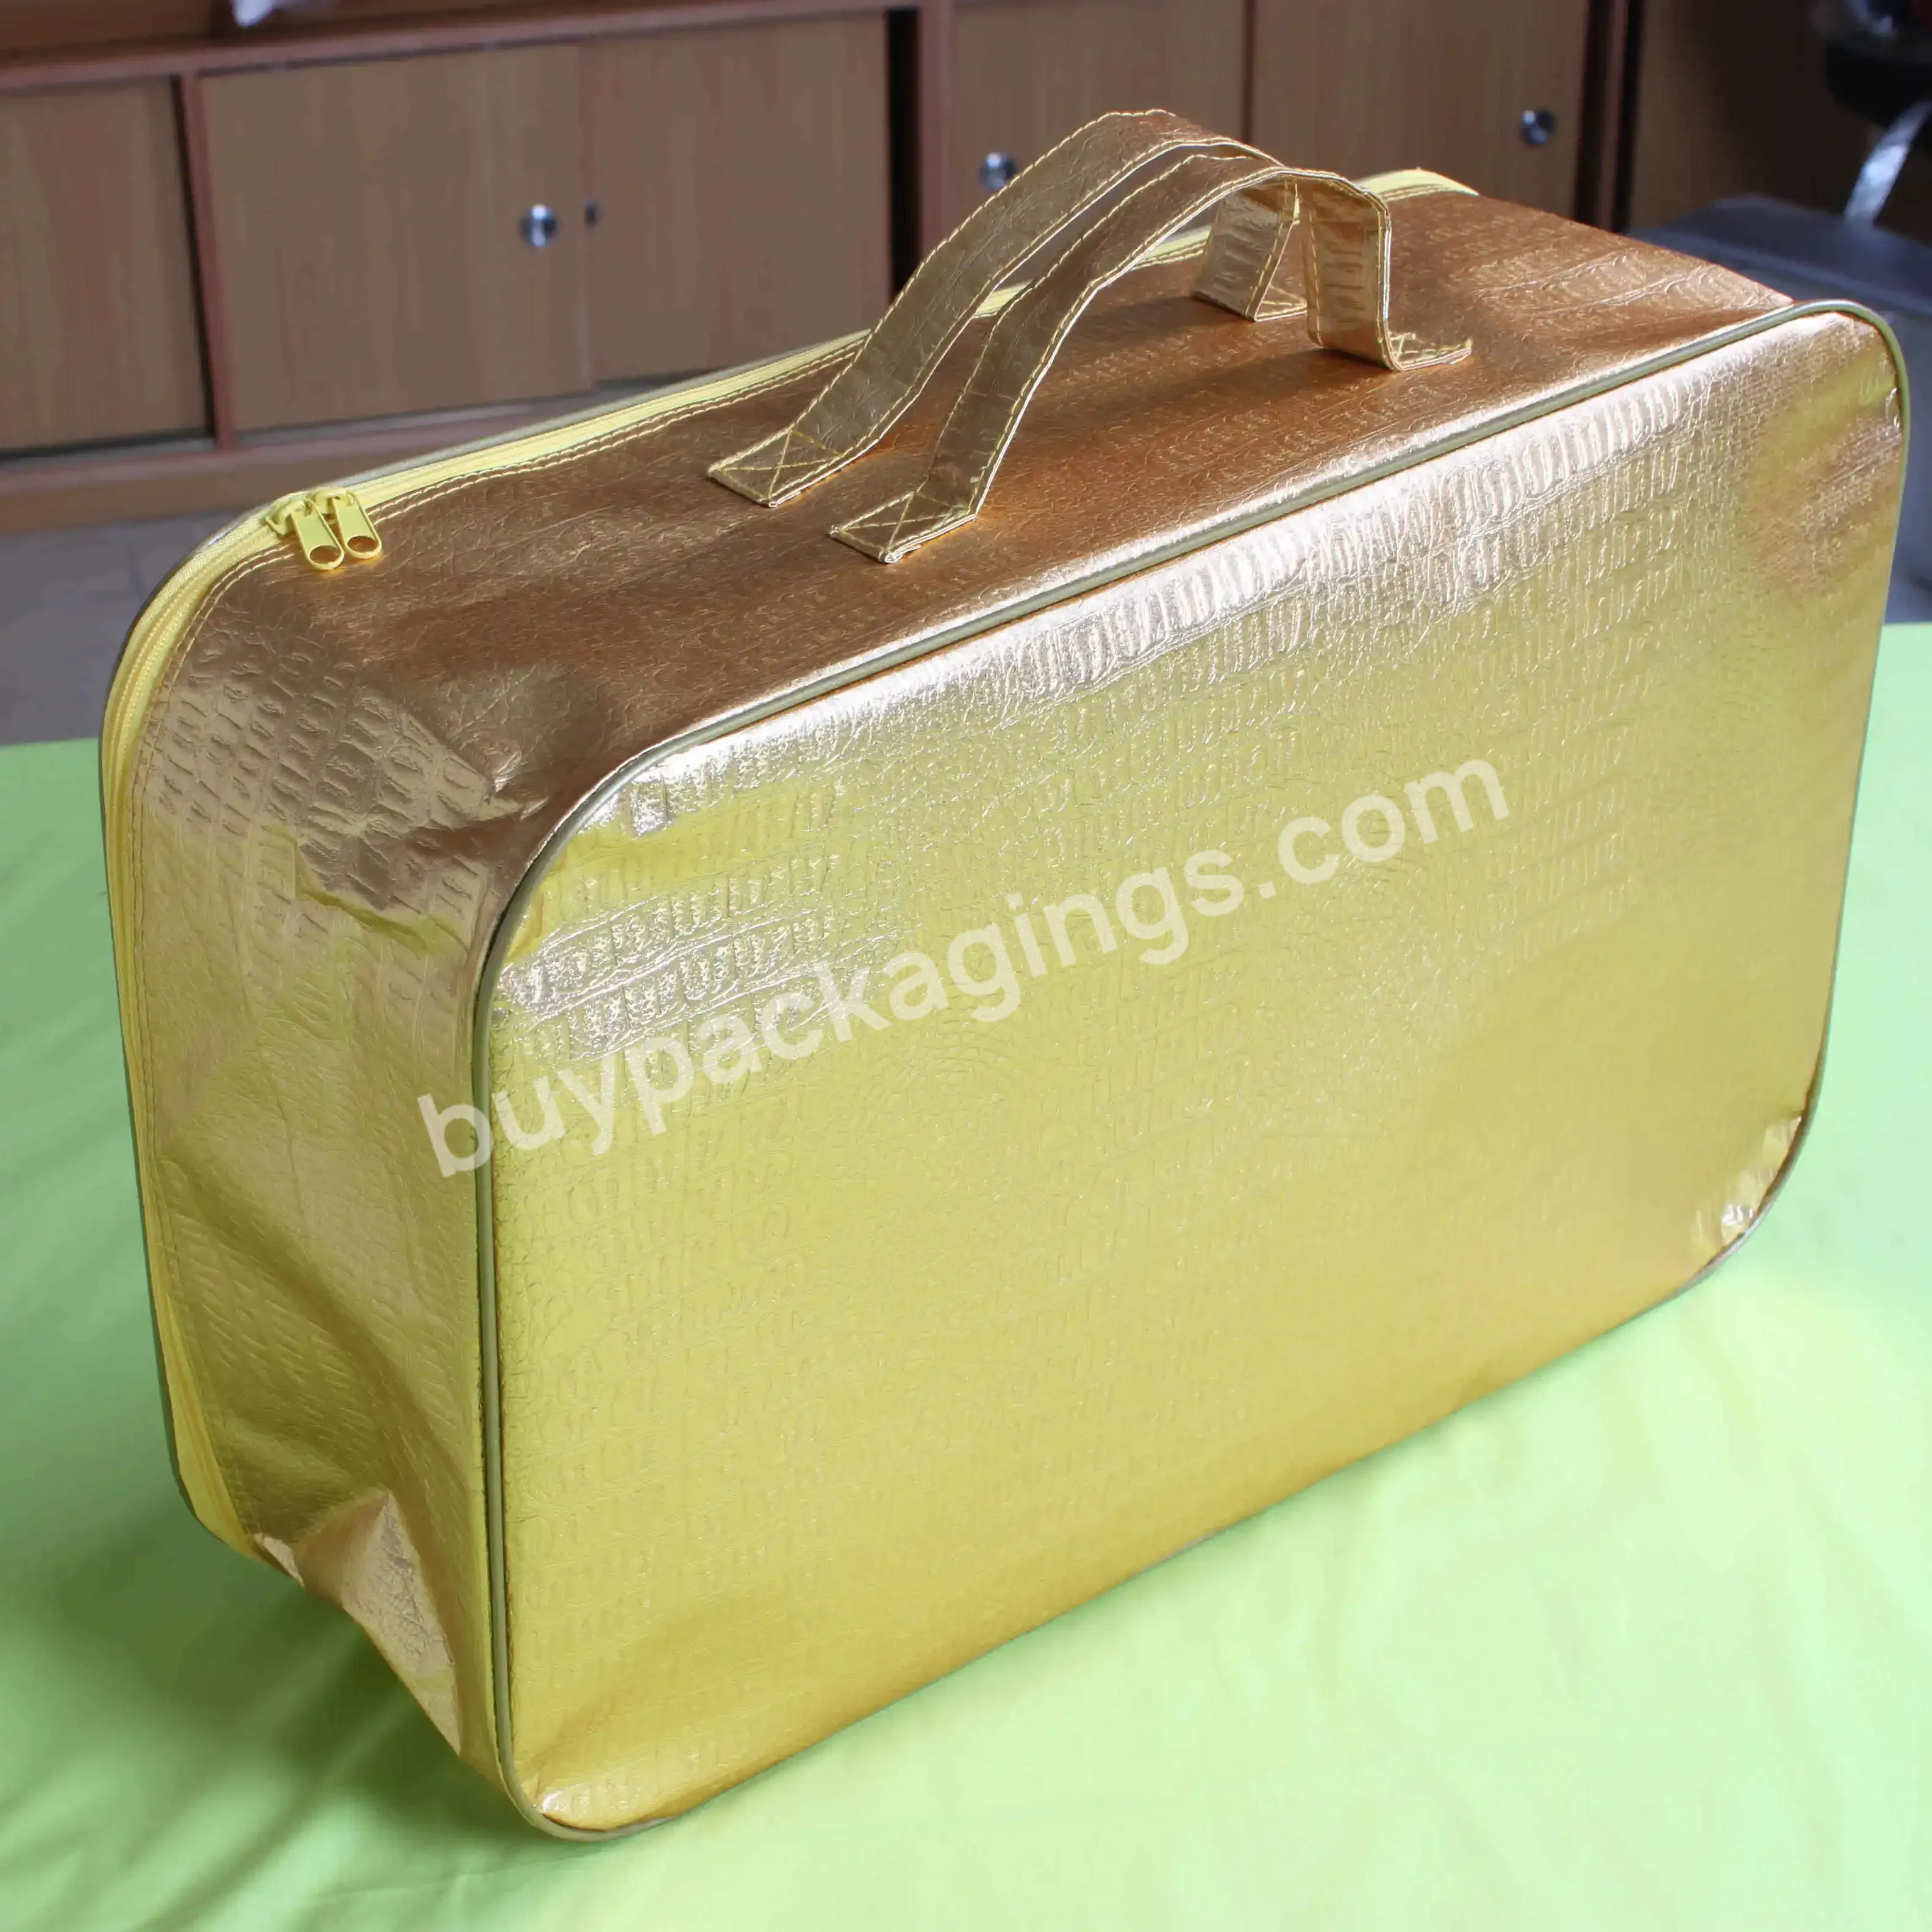 Texpack Oem Laminated Non-woven Or Plastic Wire Bag For Bedsheet Blanket Or Quilt Packing - Buy High Quality Colored Non-woven Or Plastic Bag,Plastic Packing Bags With Handles And Steel Wire,Custom Packing Bags For Bedsheet Blanket Or Quilt.